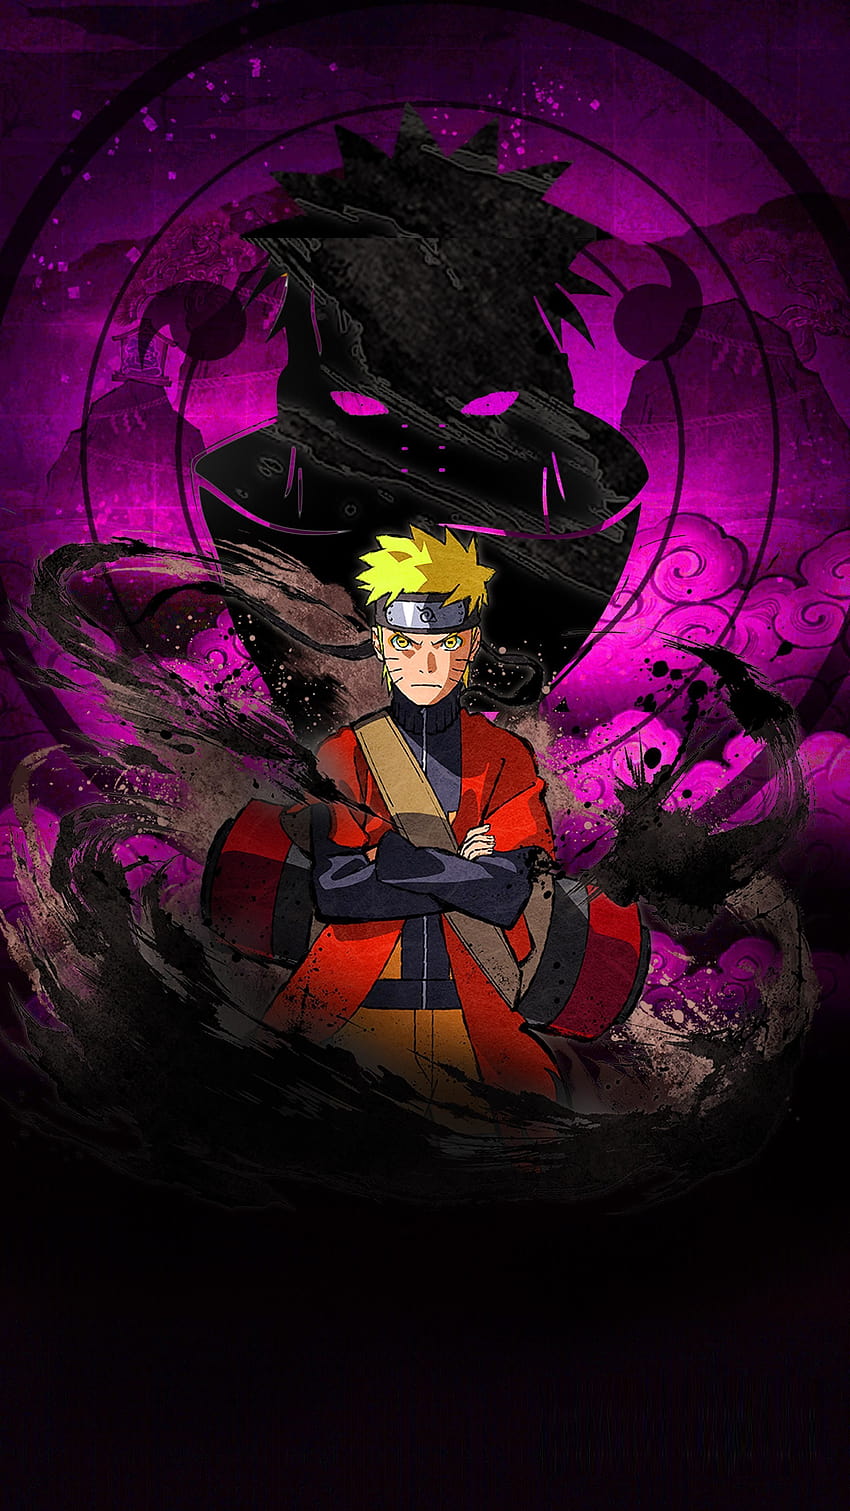 Naruto for mobile phone, tablet, computer and other devices and . in 2021, uchiha mobile HD phone wallpaper